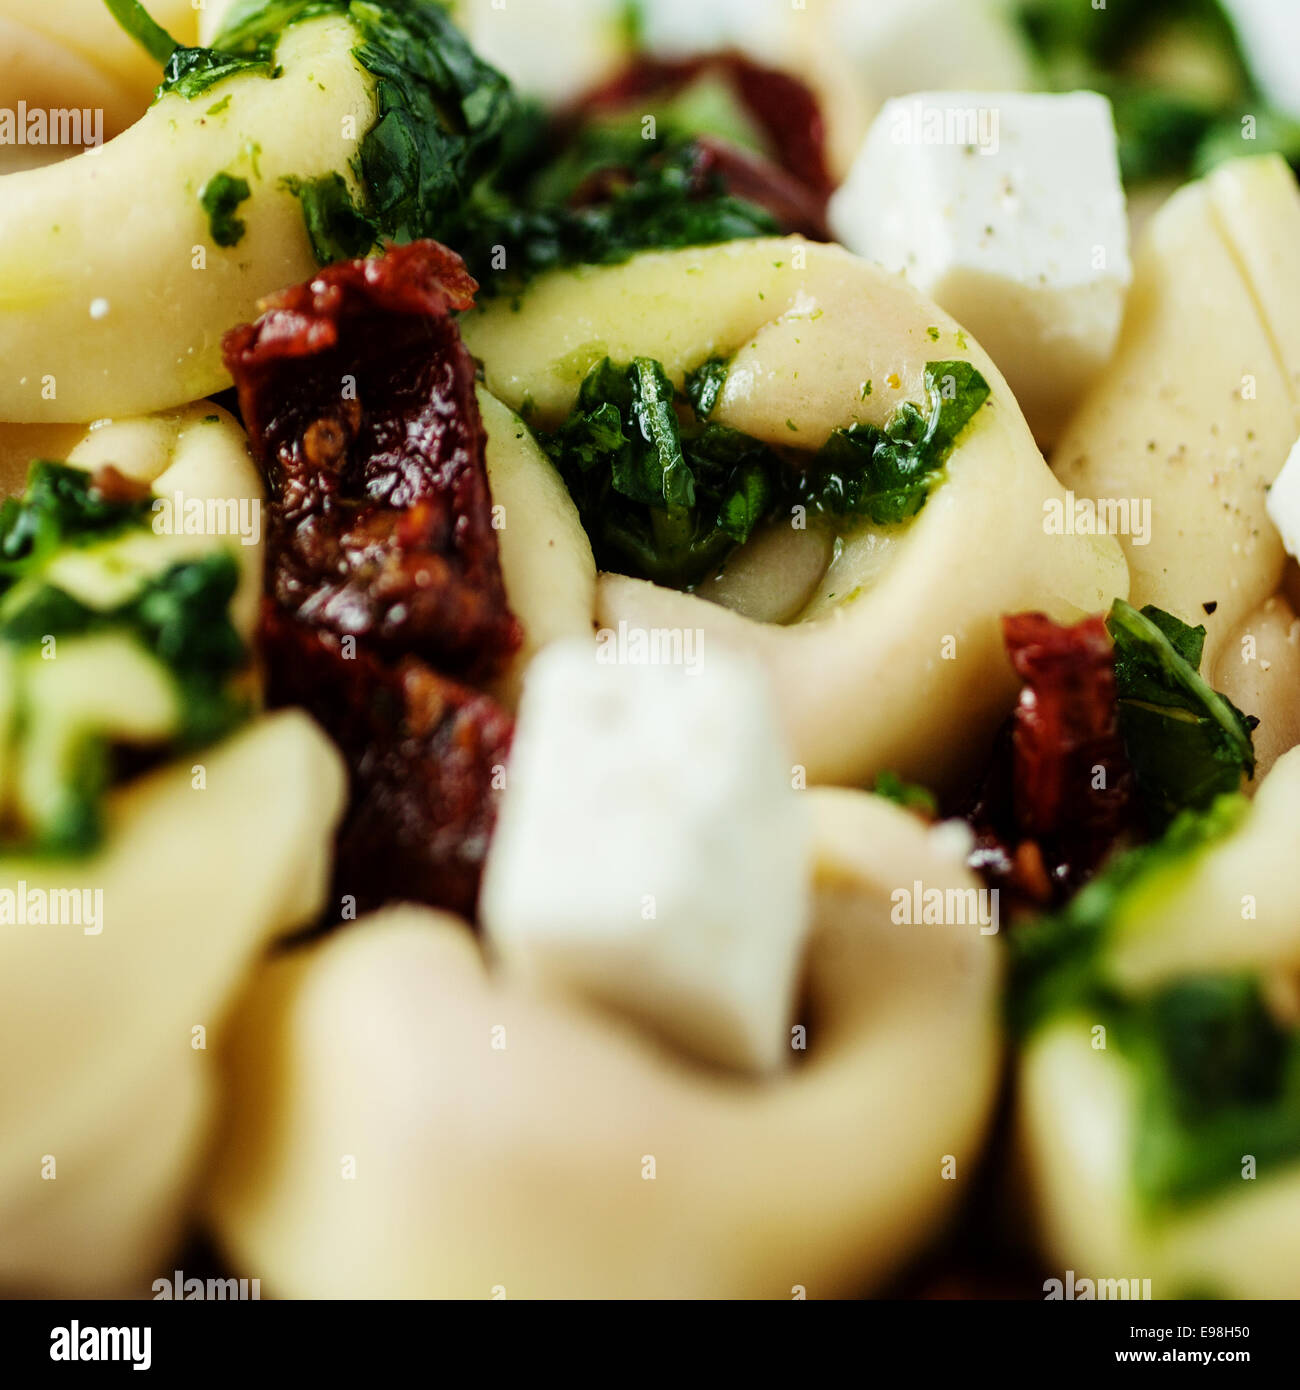 Tasty Italian cuisine with a close up view of stuffed tortellini pasta with feta and basil pesto in square format Stock Photo